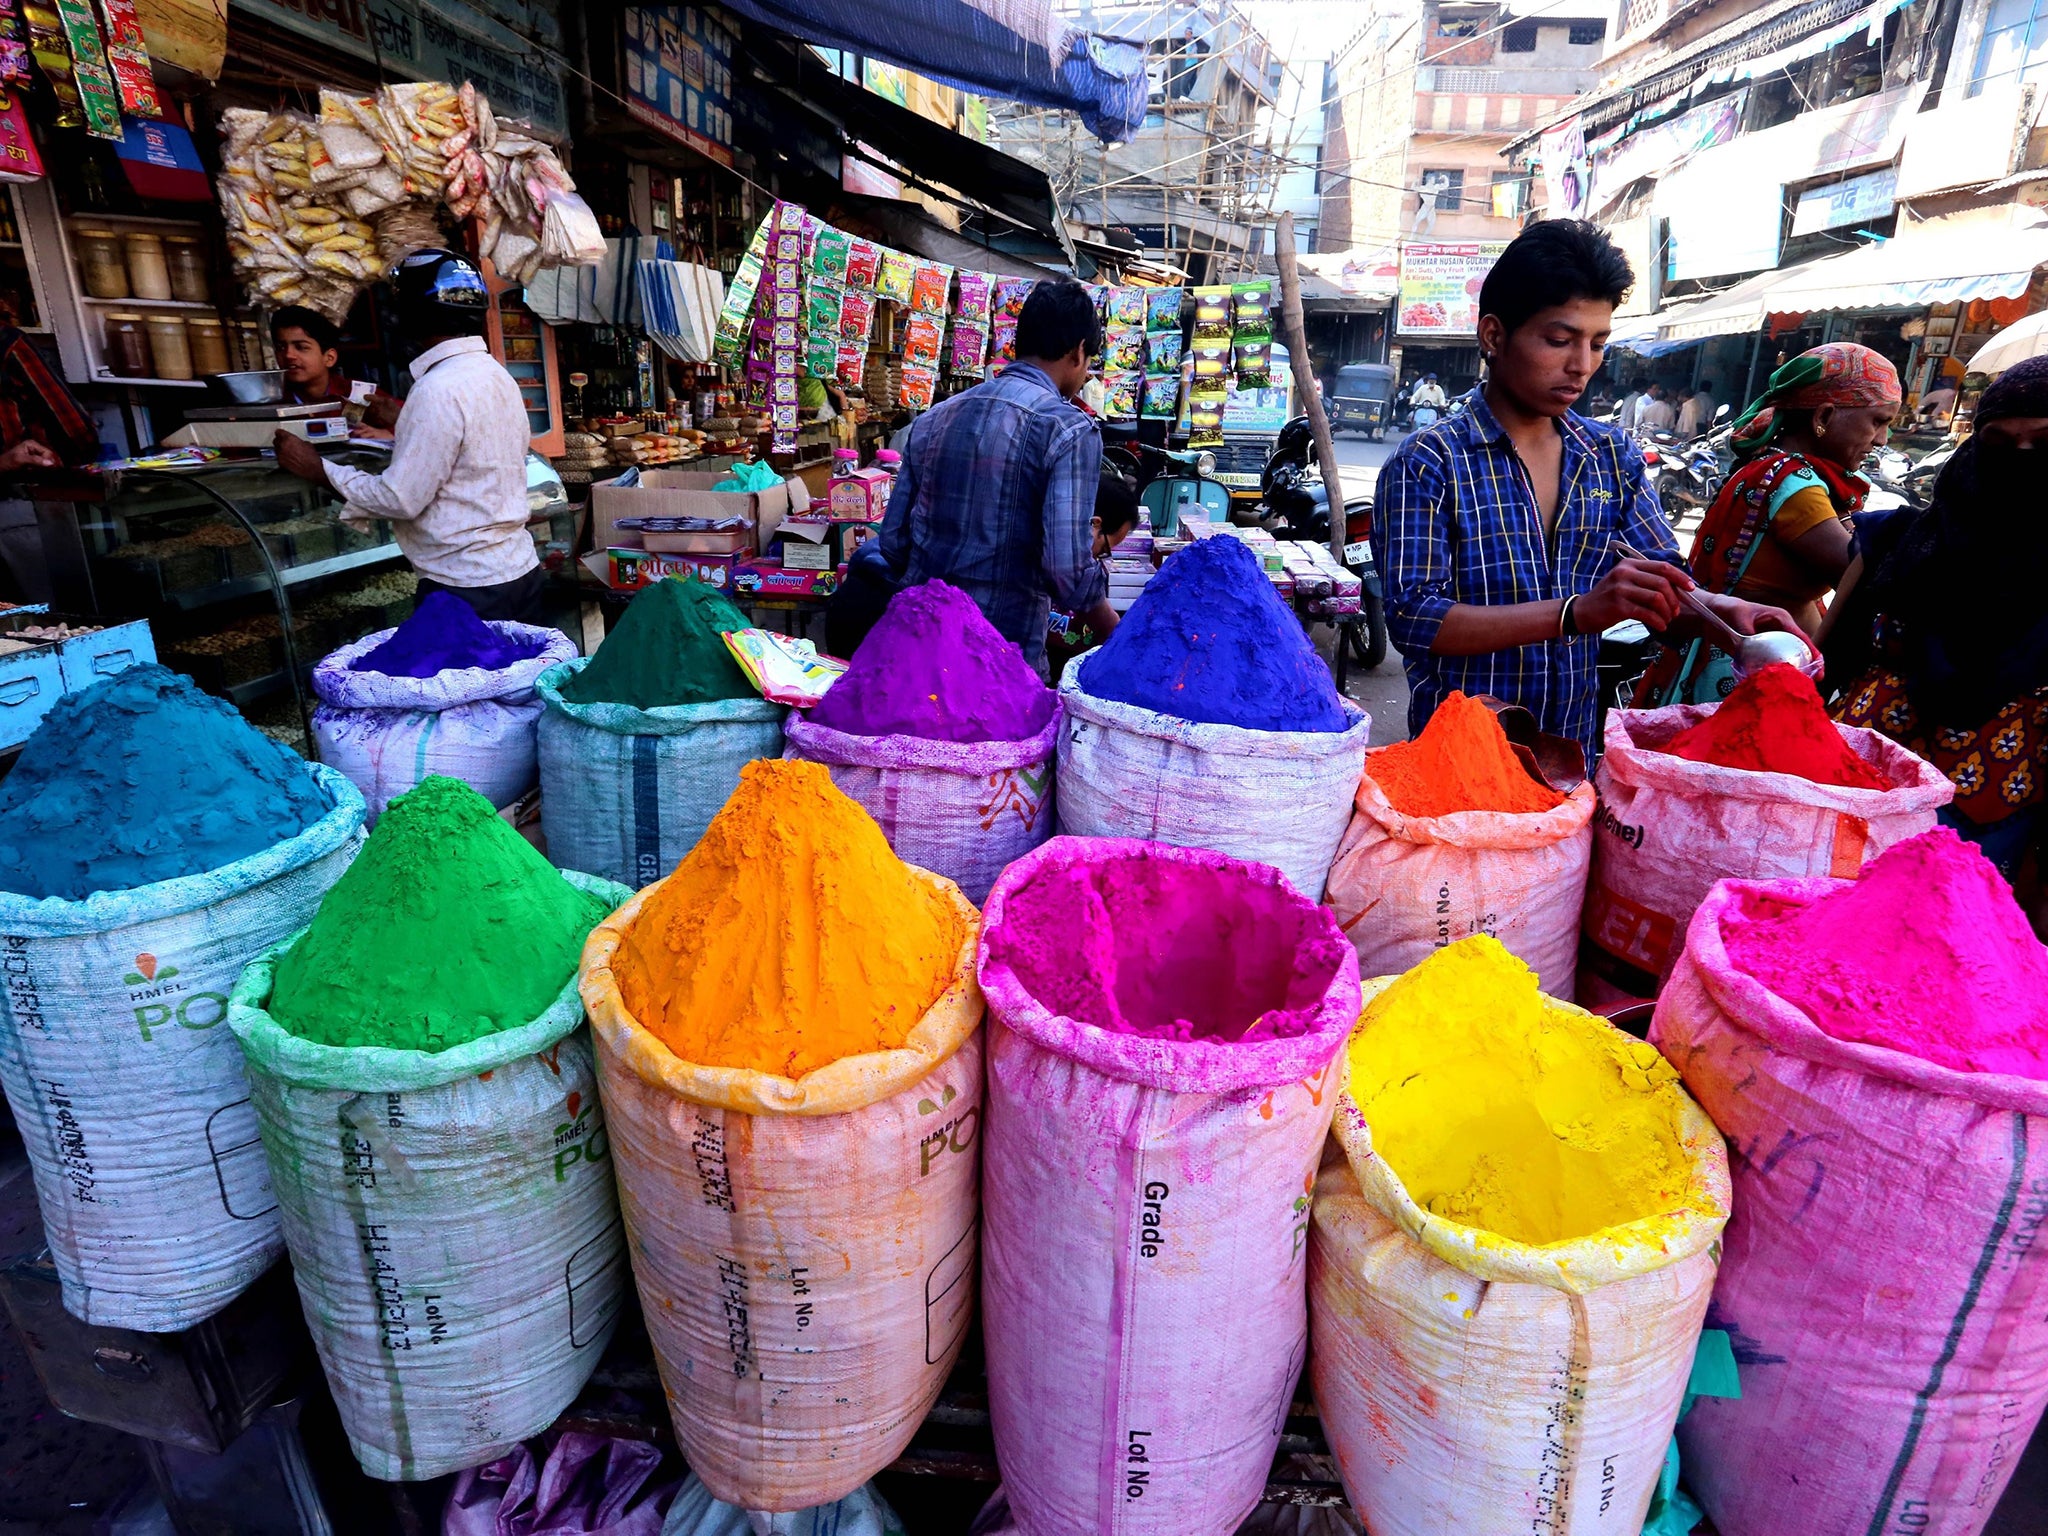 Powdered colors are displayed for sale at a market ahead of the Holi festival in Bhopal, India